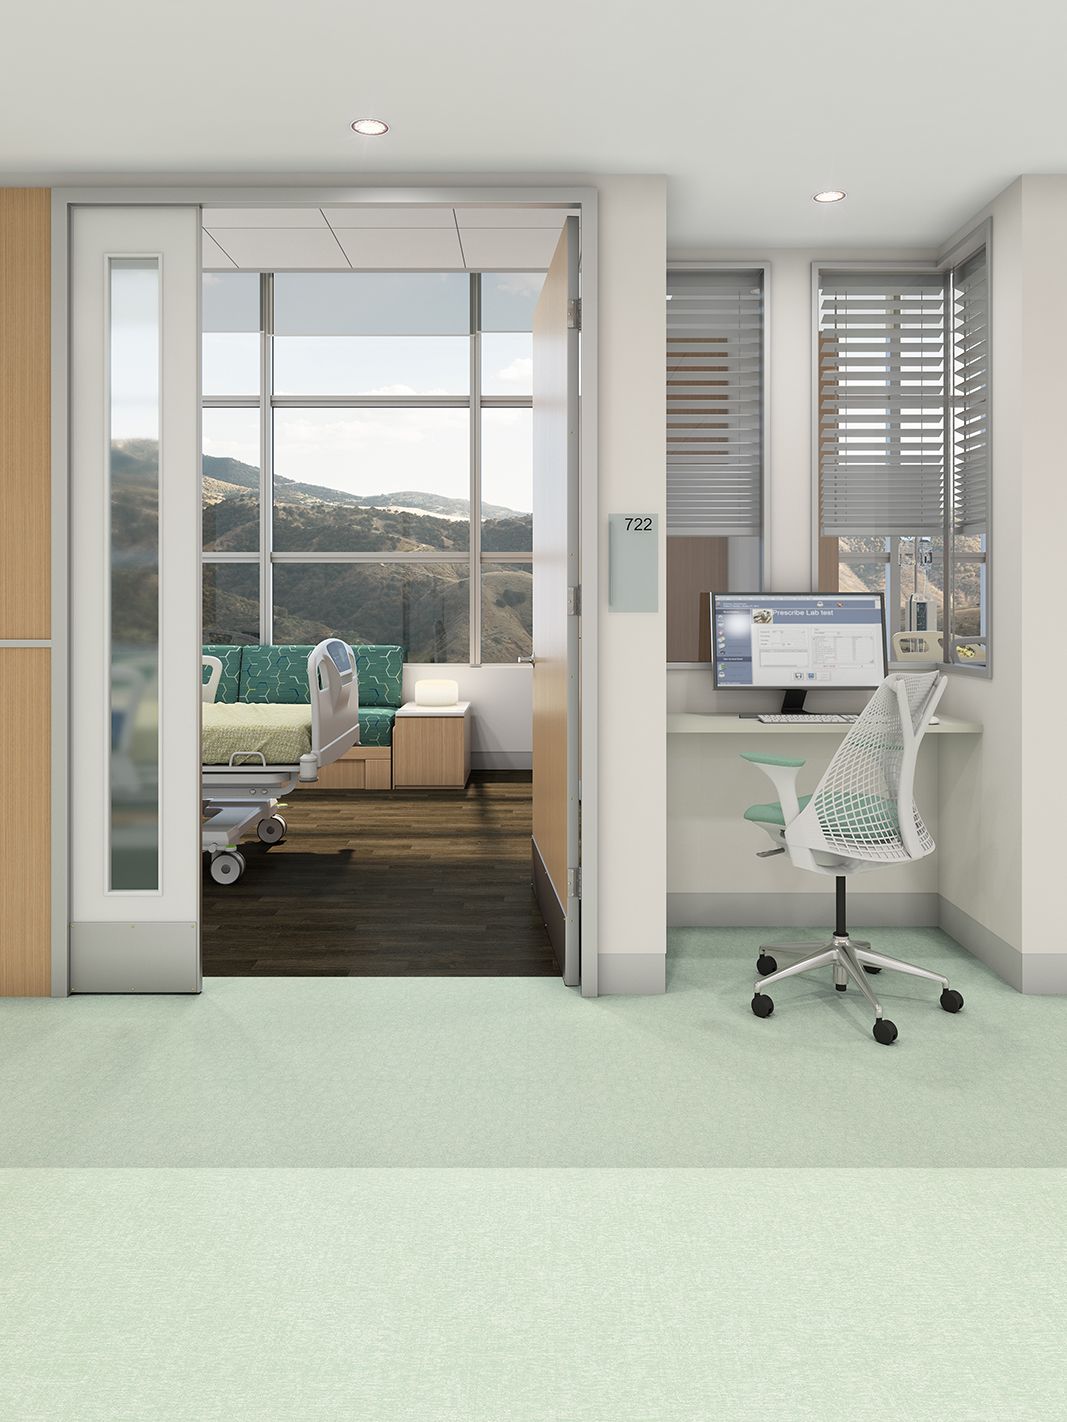 Interface's Spike-tacular, Bloom with a View and Continual Woodgrains vinyl sheet in hospital corridor and patient room image number 1